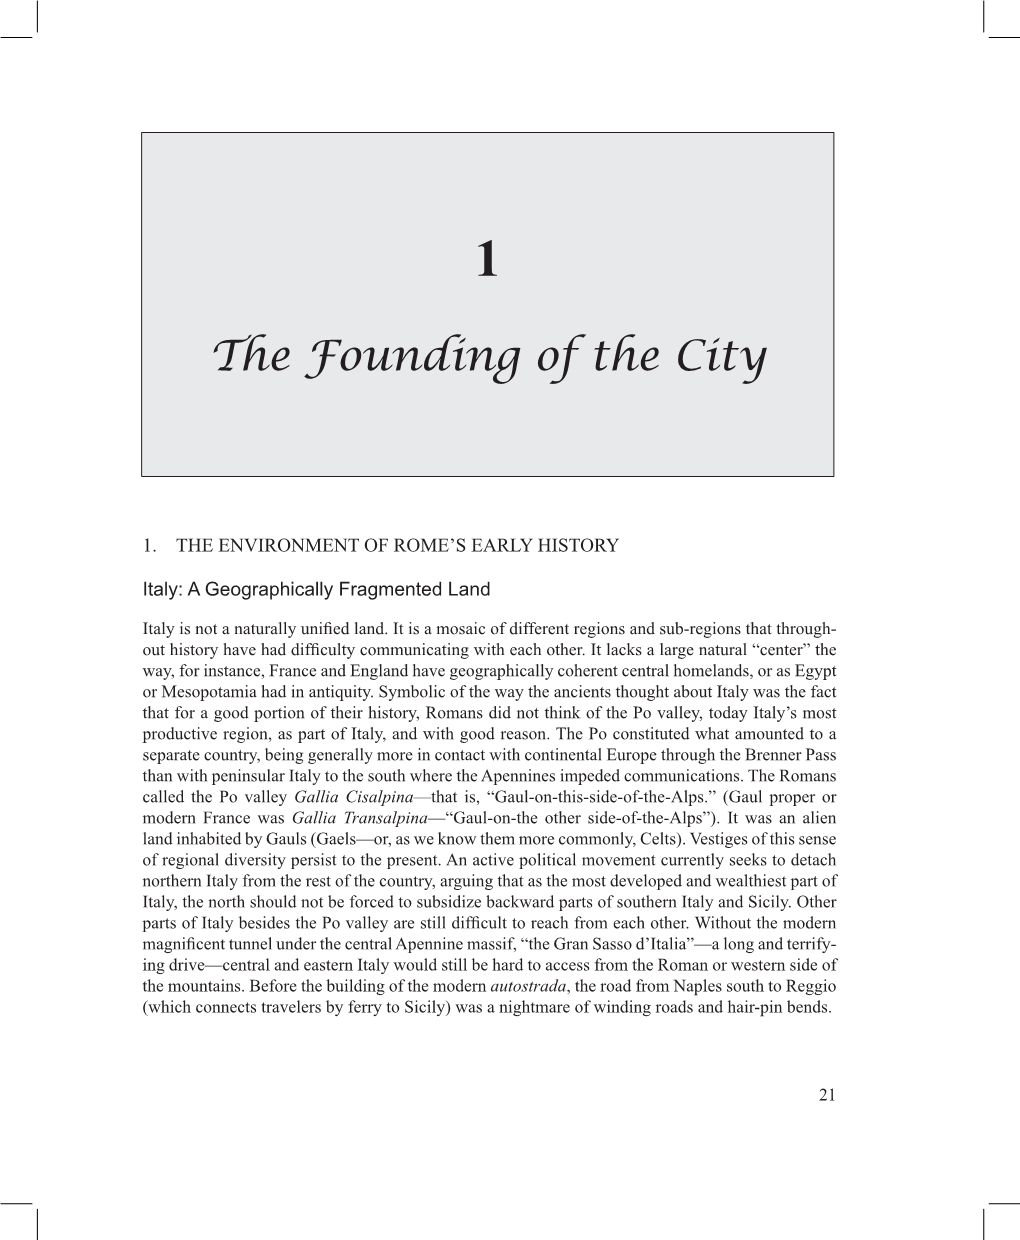 The Founding of the City